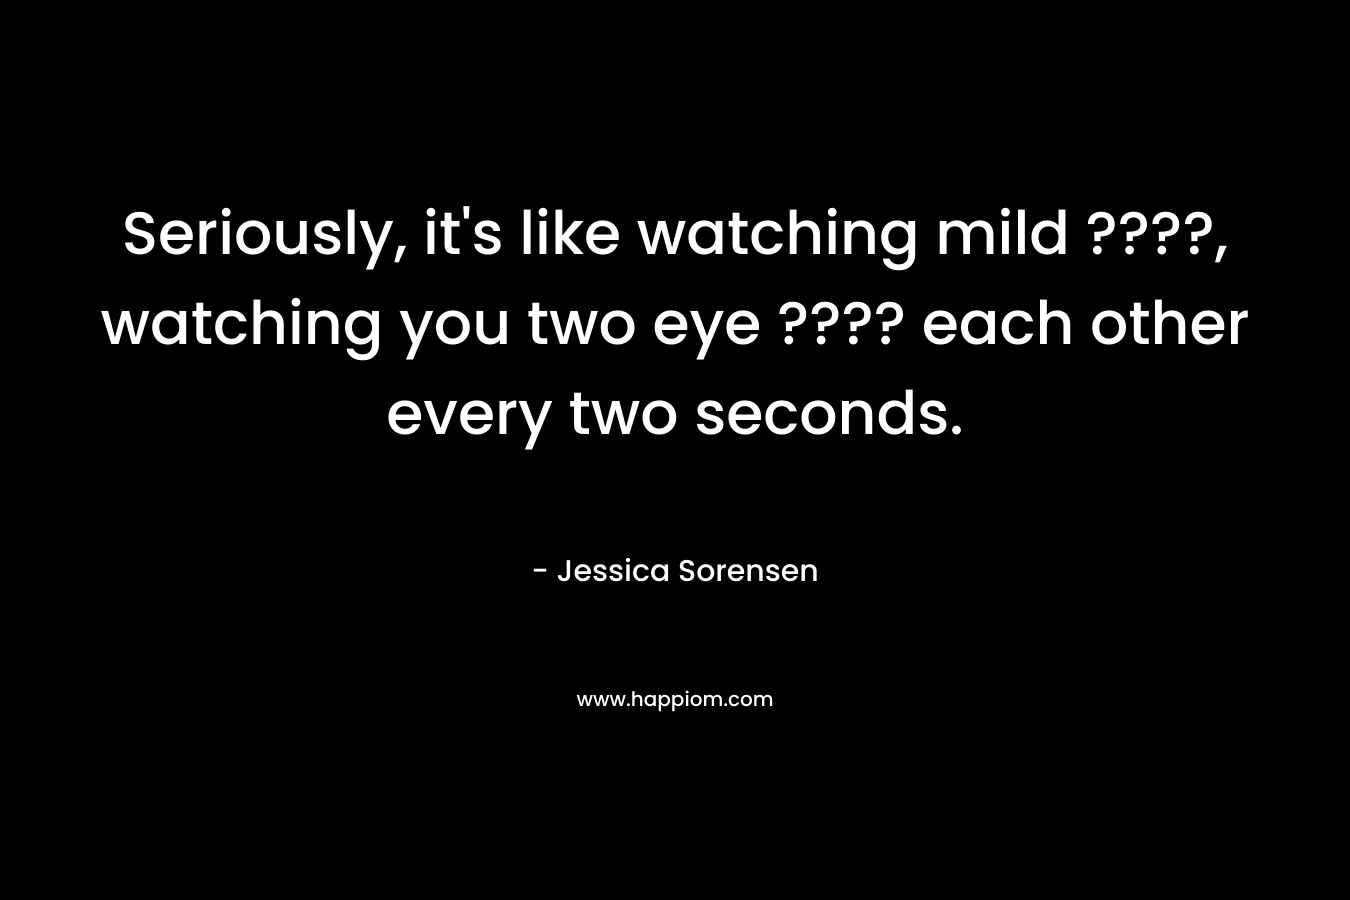 Seriously, it's like watching mild ????, watching you two eye ???? each other every two seconds.